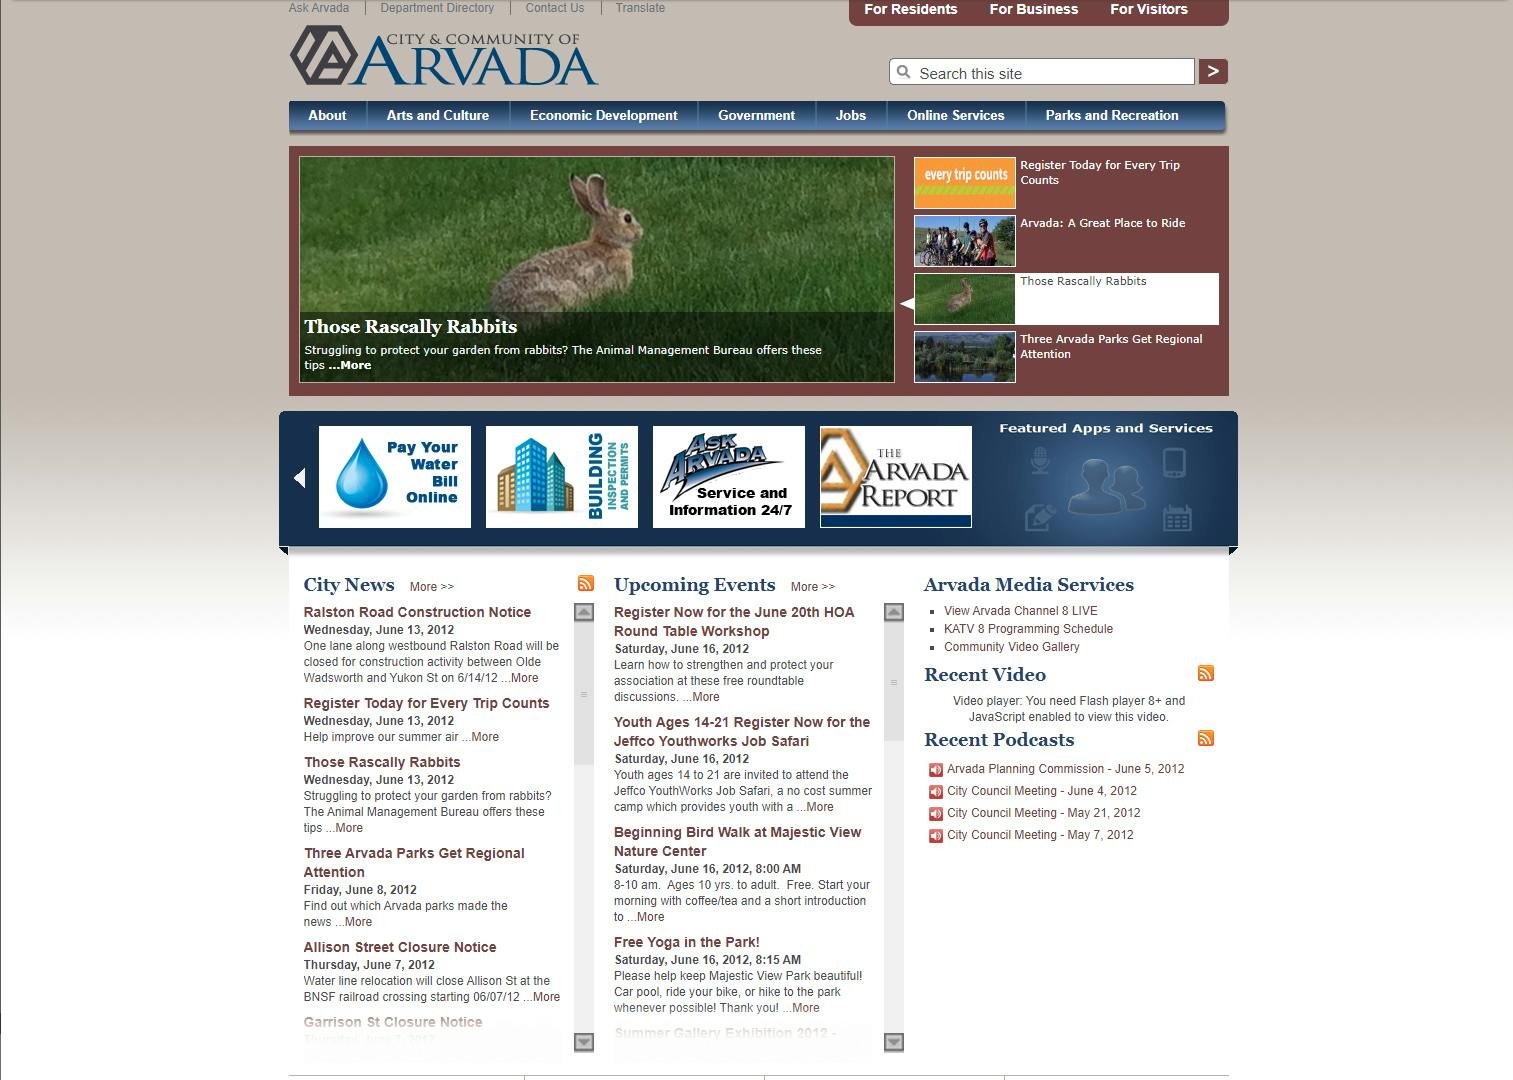 Arvada.org in 2012